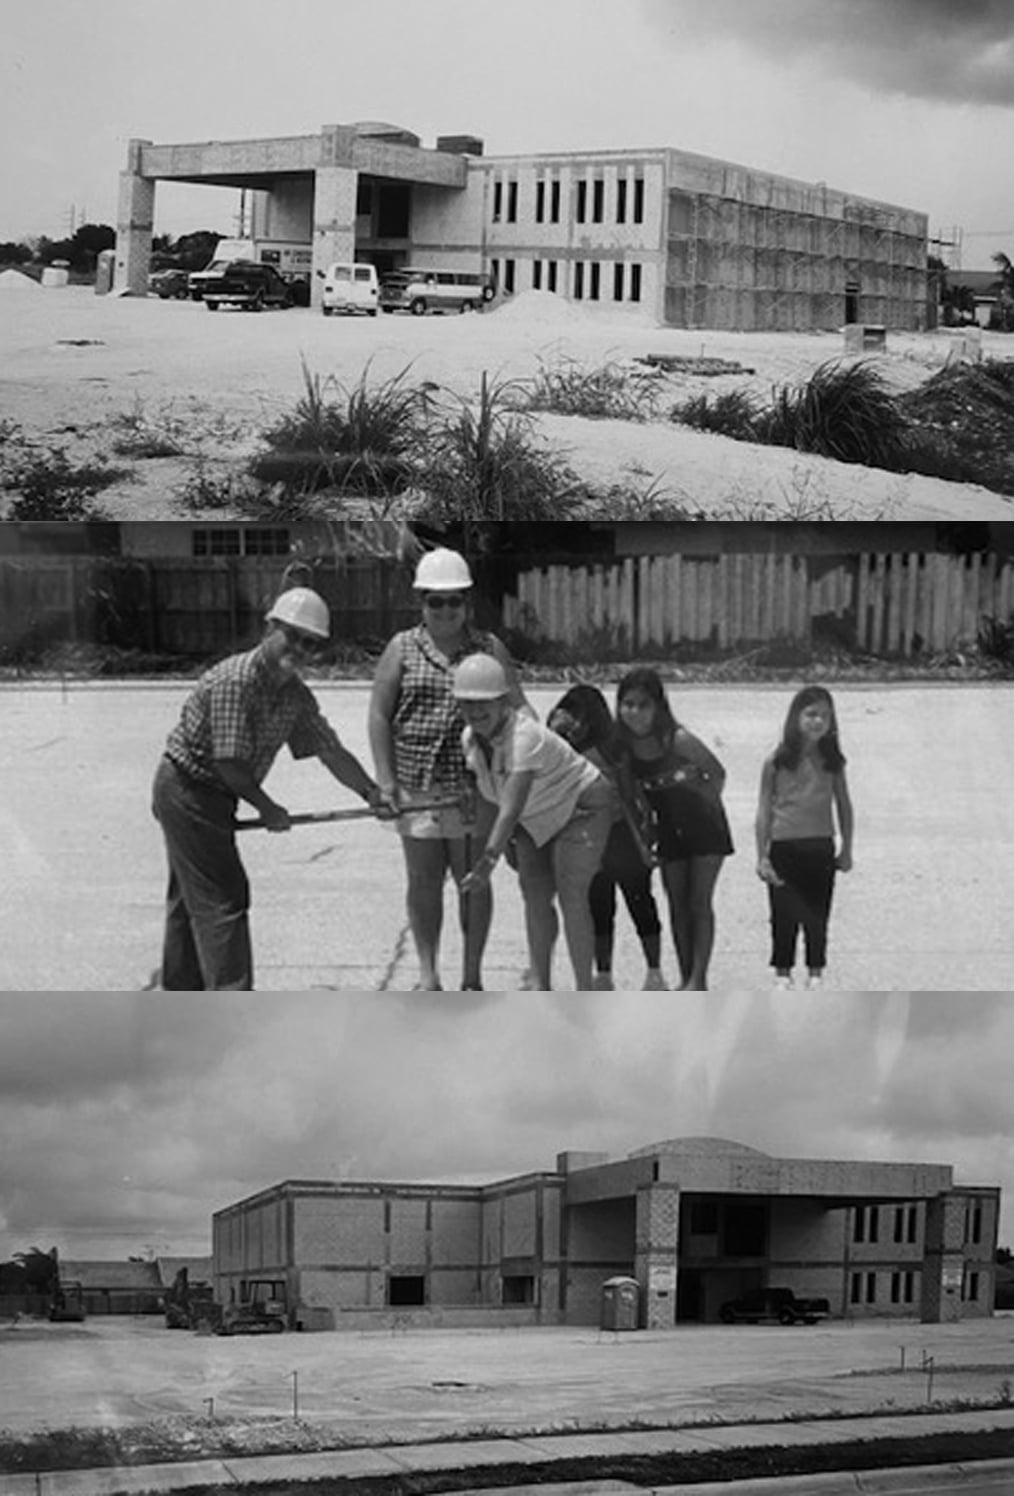 A black and white photo of a construction site and a group of children.